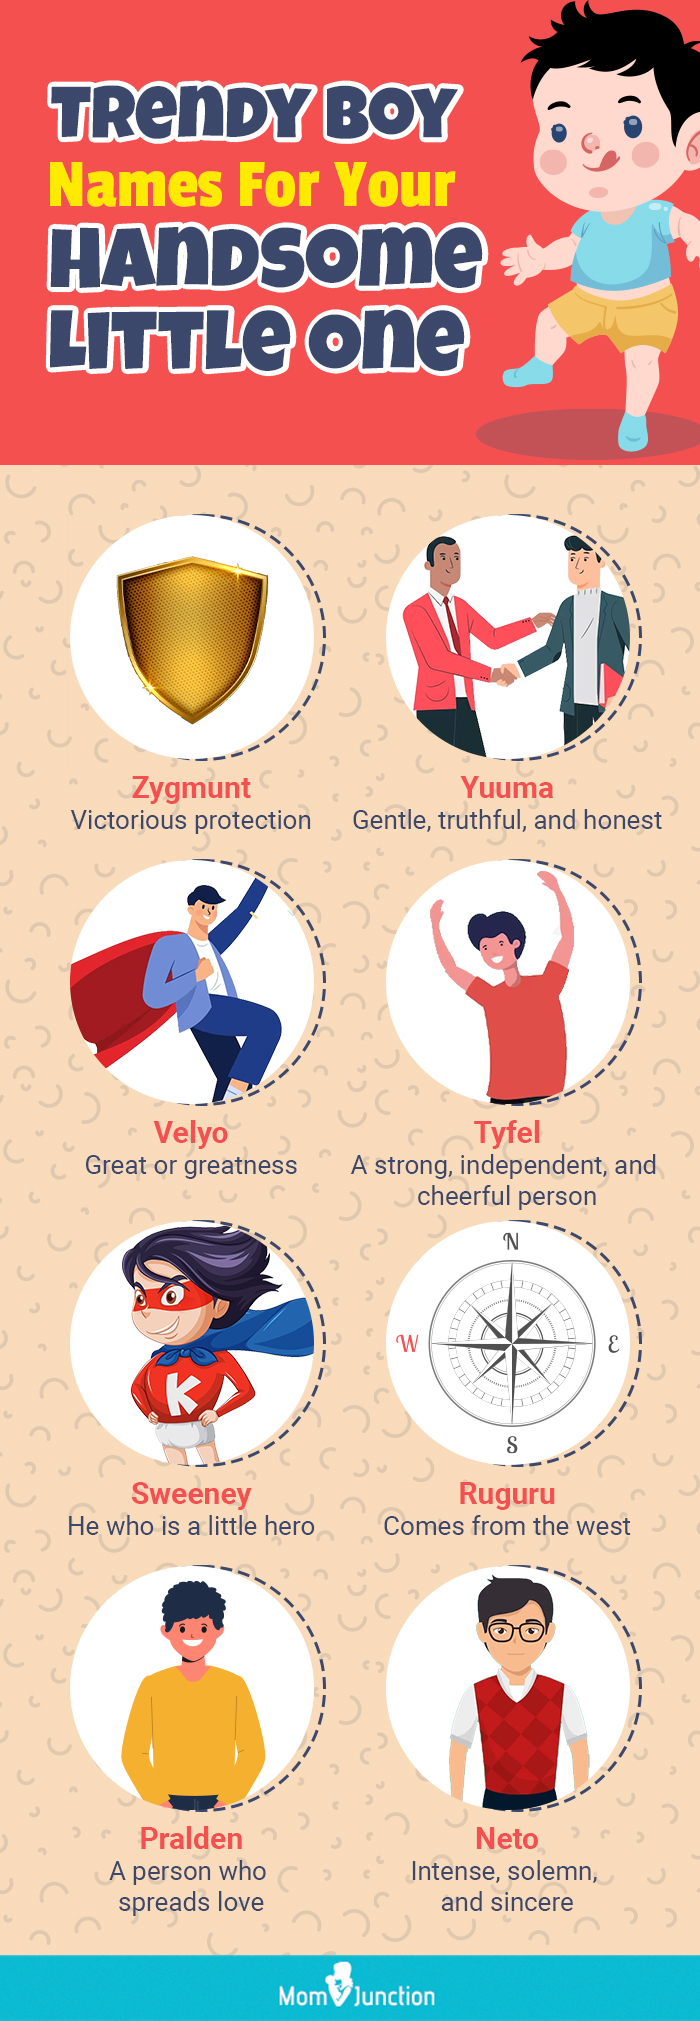 trendy boy names for your handsome little one (infographic)